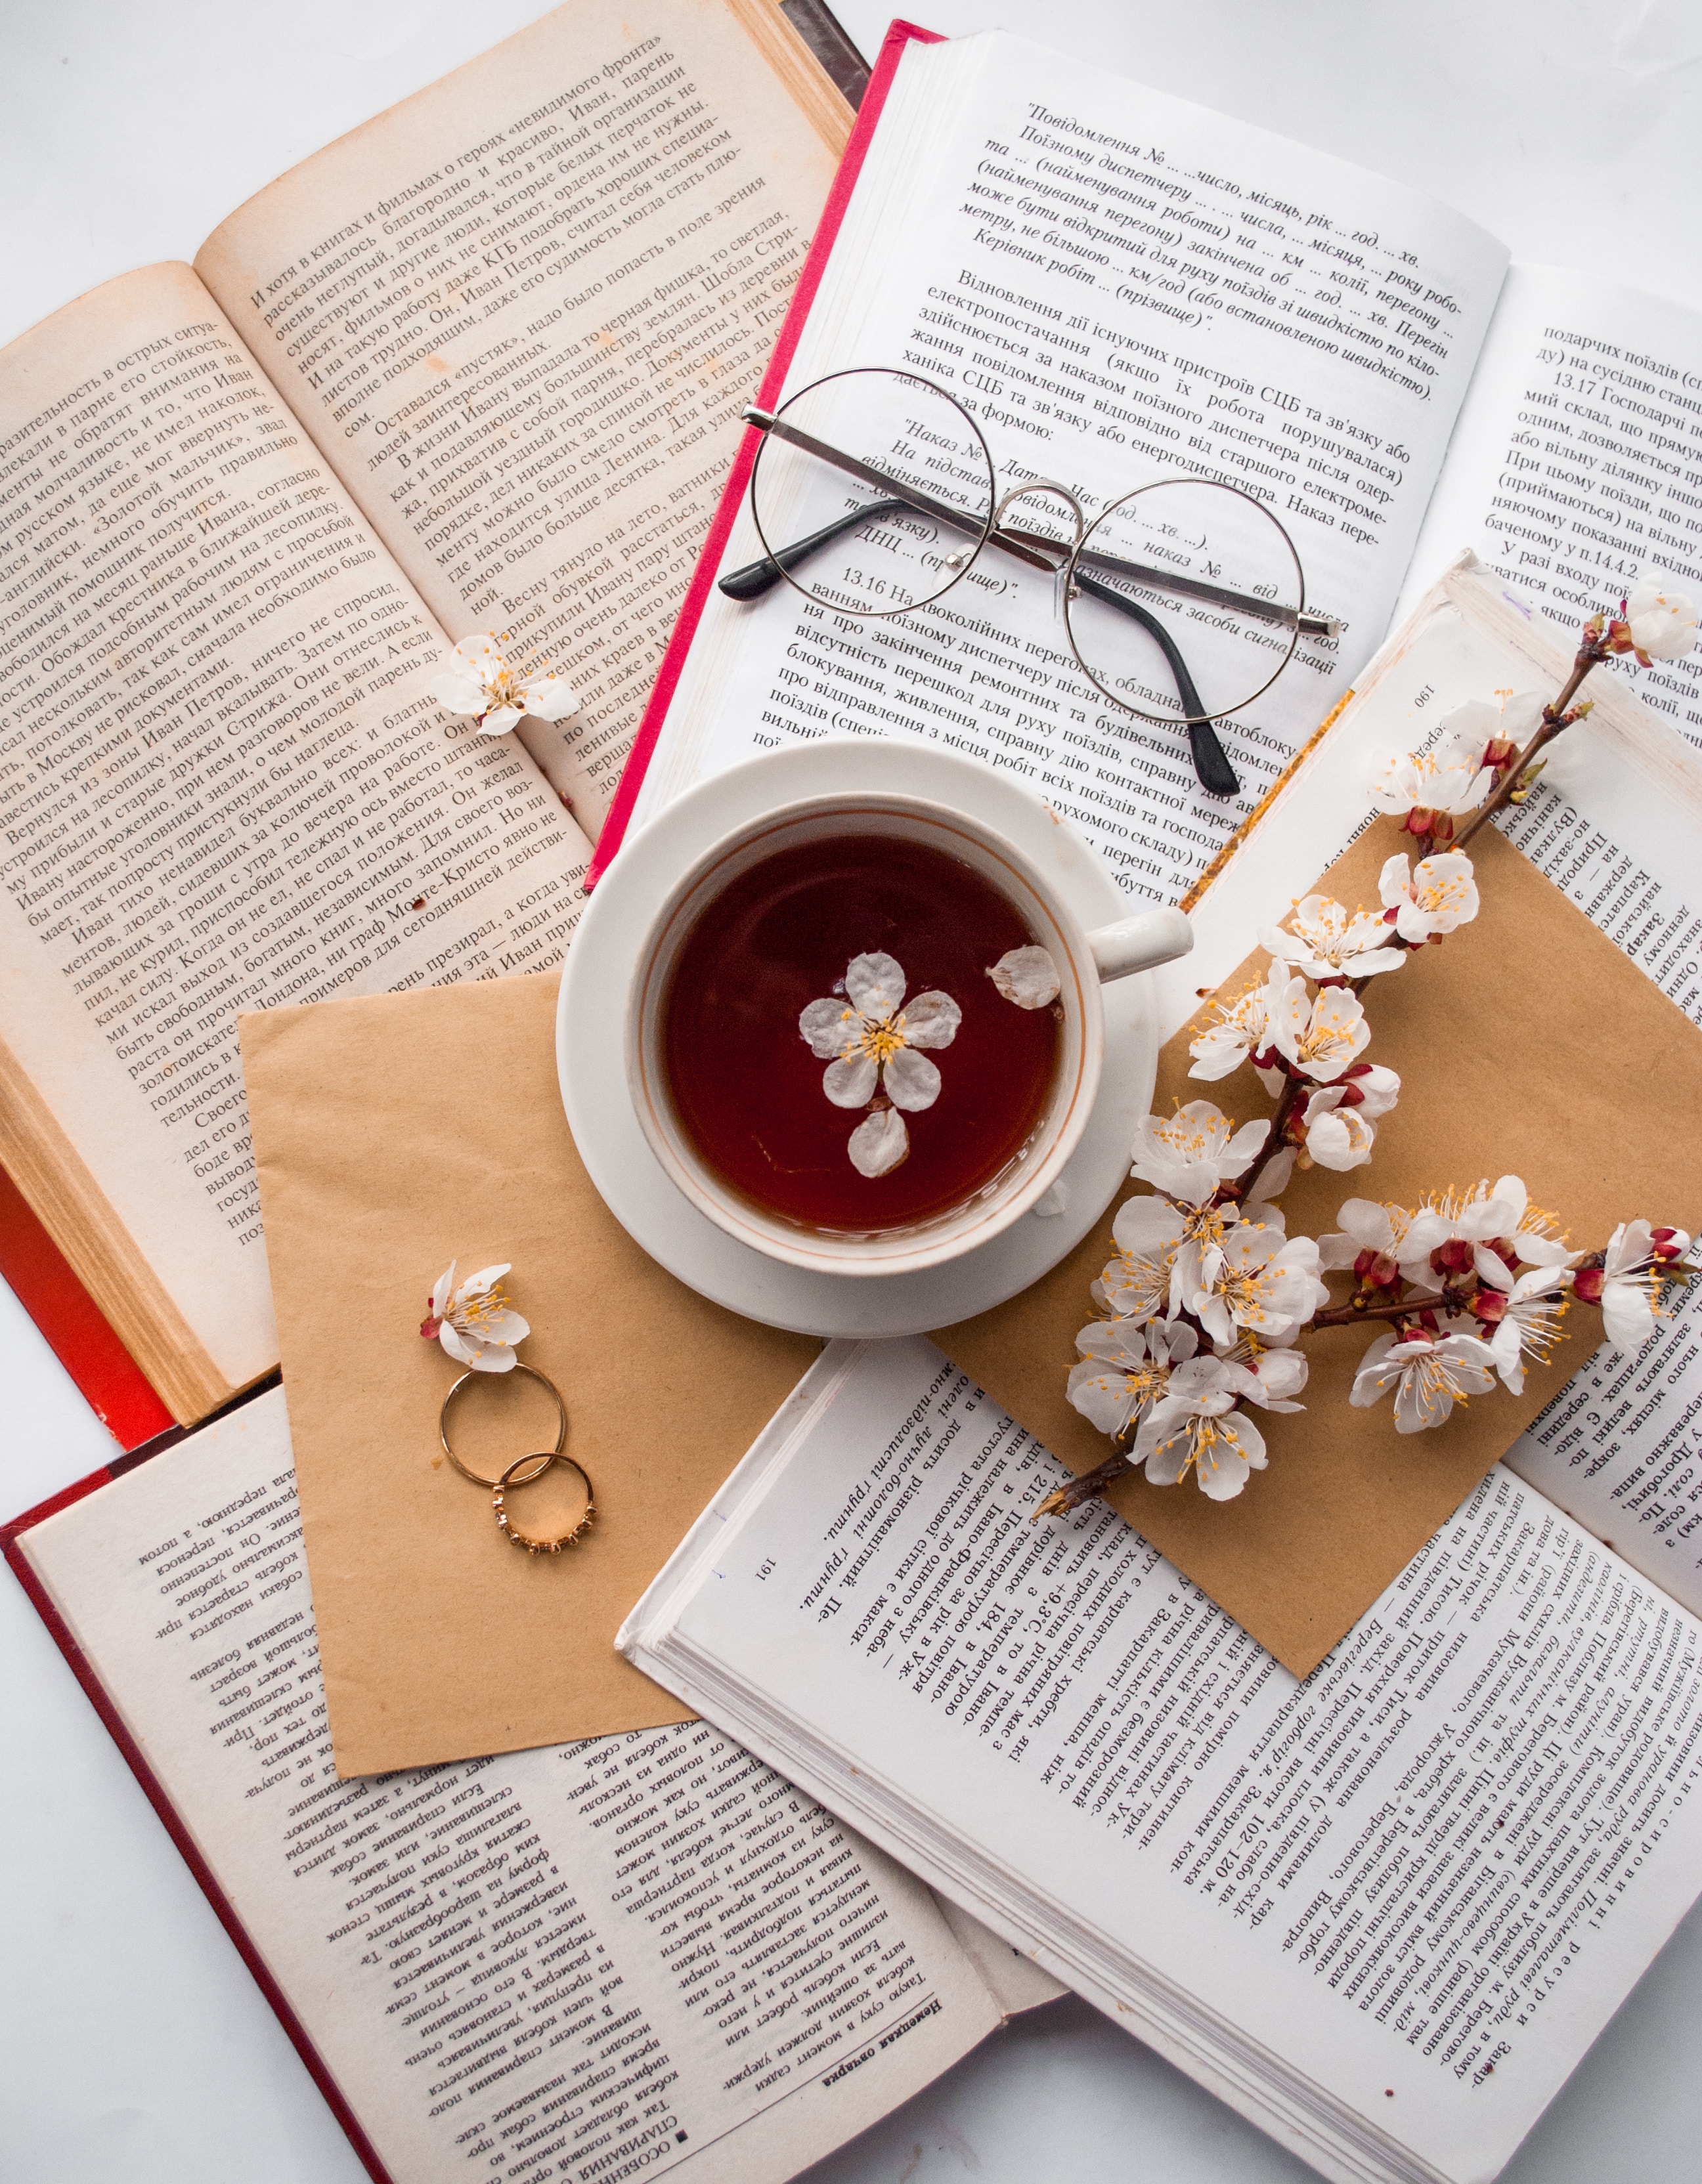 cup, books, flowers, rings, miscellanea, miscellaneous, glasses, spectacles